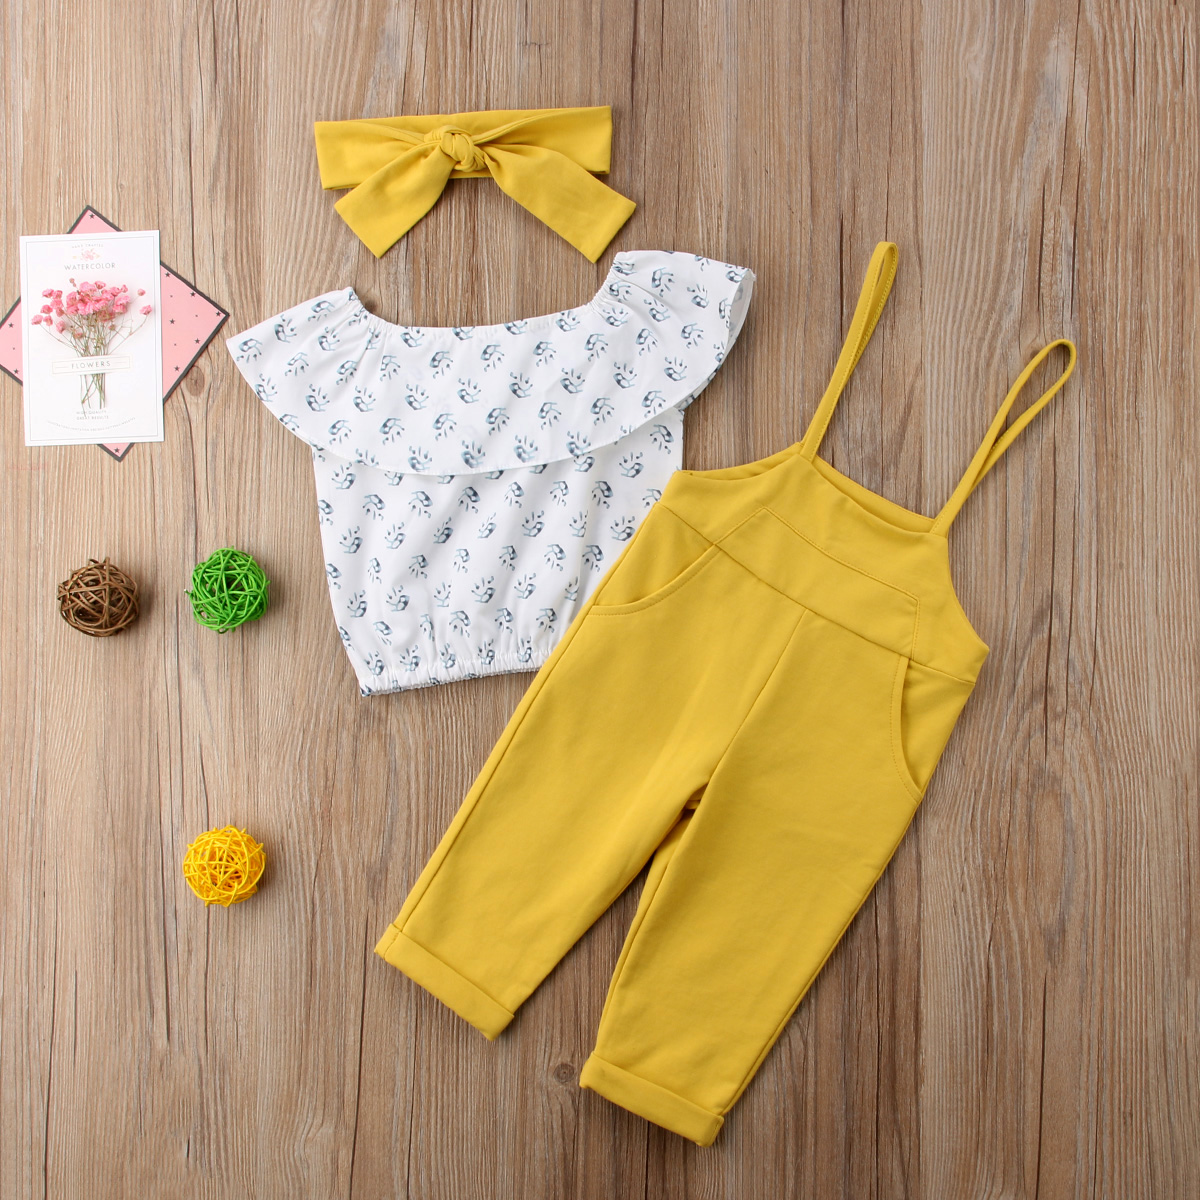 Toddler Baby Girl Kids Off Shoulder Tops+Long Pants Summer Clothes Outfit  3PCS Set Yellow 3-4 Years 